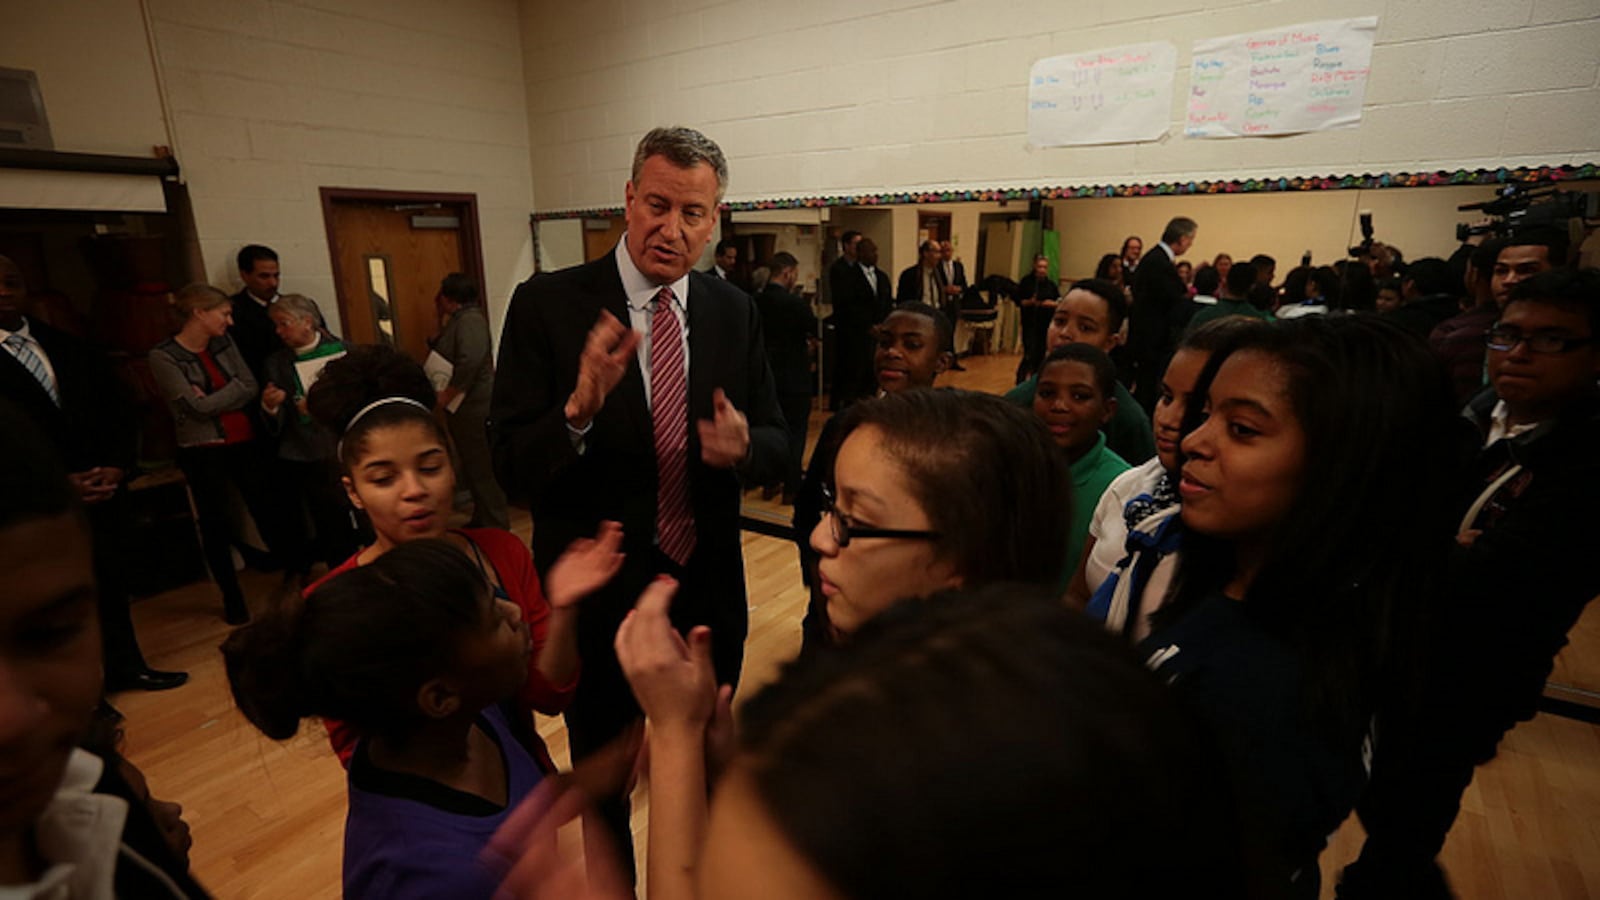 Mayor Bill de Blasio at M.S. 331 talking about after-school programs for middle school students in 2014.